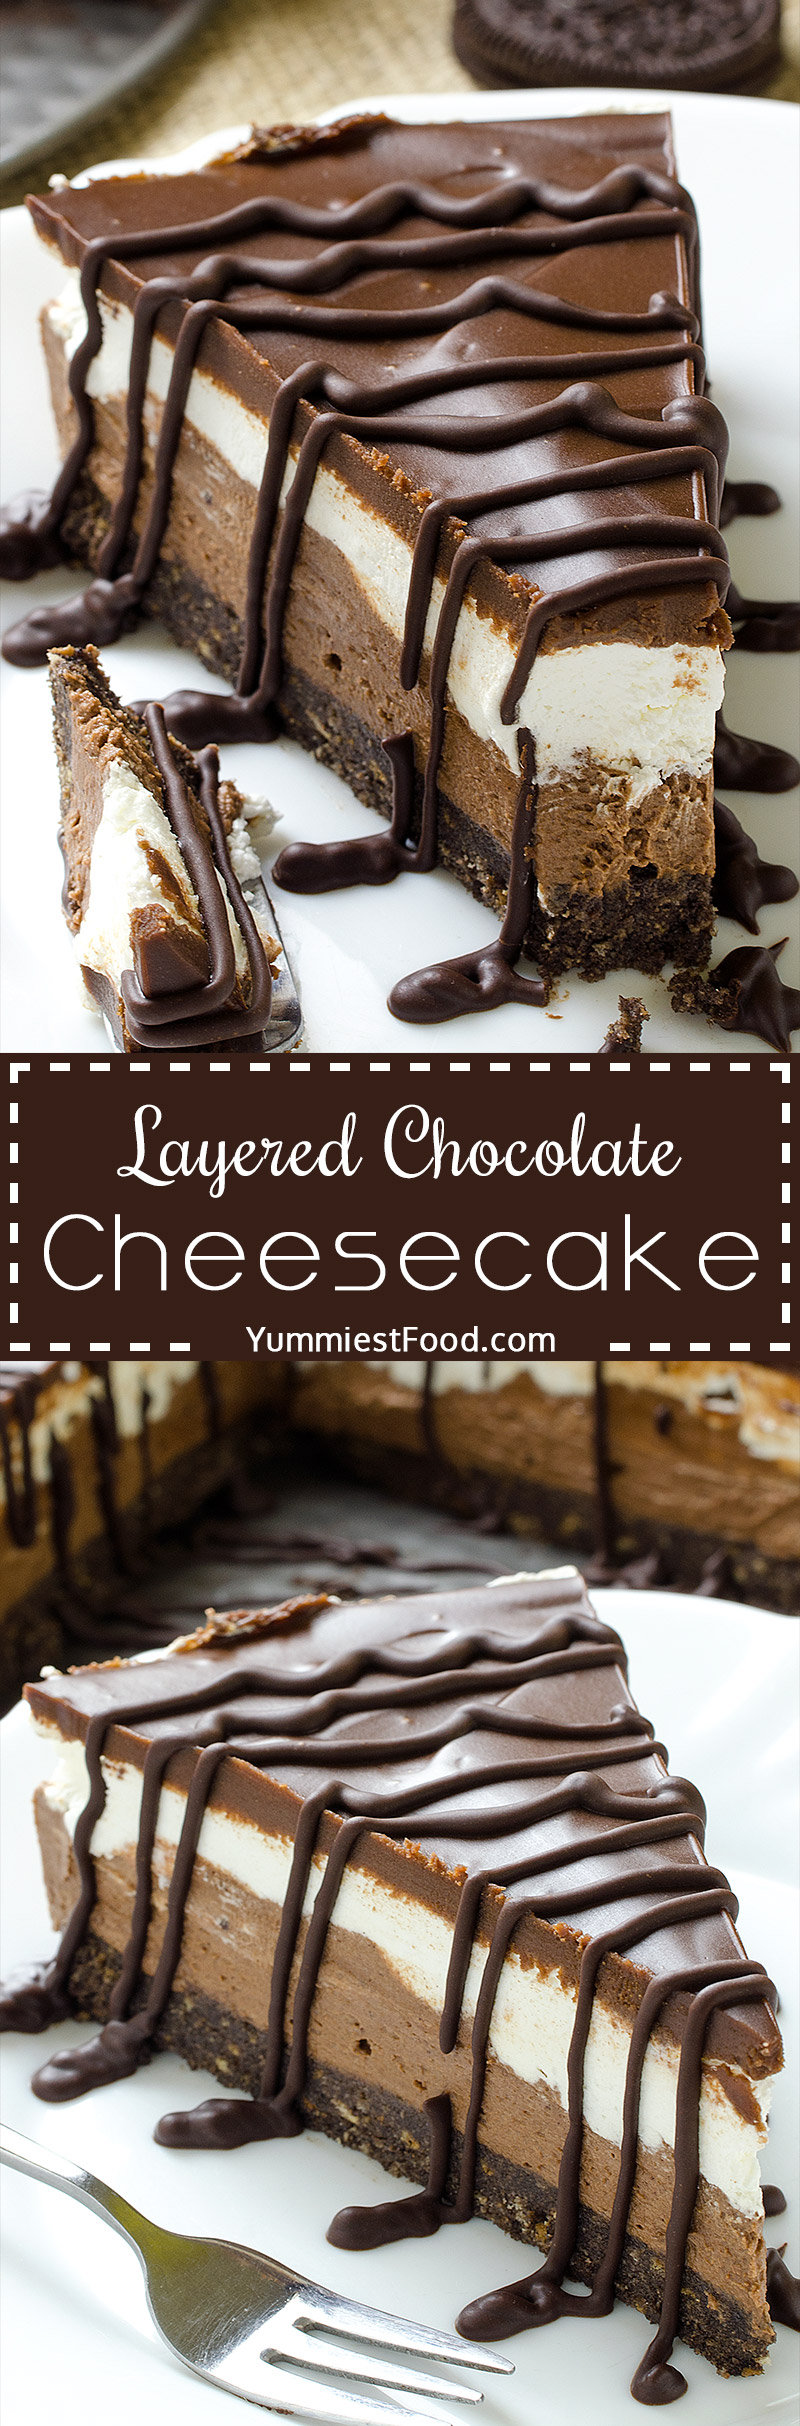 Layered Chocolate Cheesecake with Oreo Crust - creamy, moist and very delicious cake! Perfect for every occasion and so easy and quick to make.